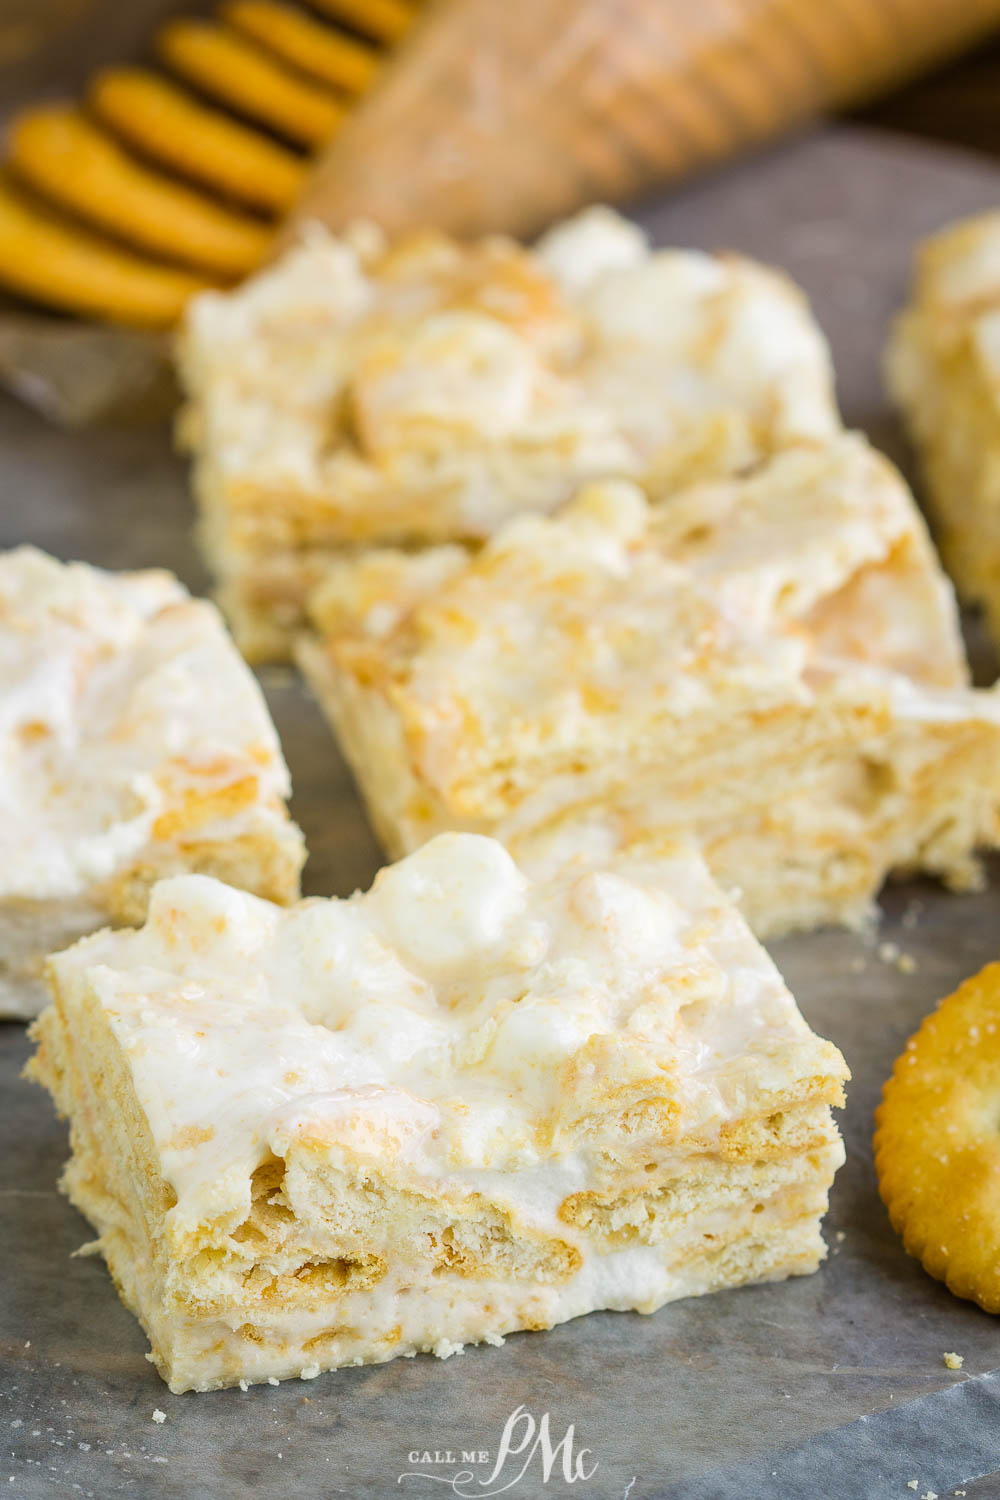 Ritz Krispie Treats are lip-smacking, finger-licking good and a spin-off of Rice Krispie treats. They're made with buttery crackers for an insanely good sweet and salty fix!